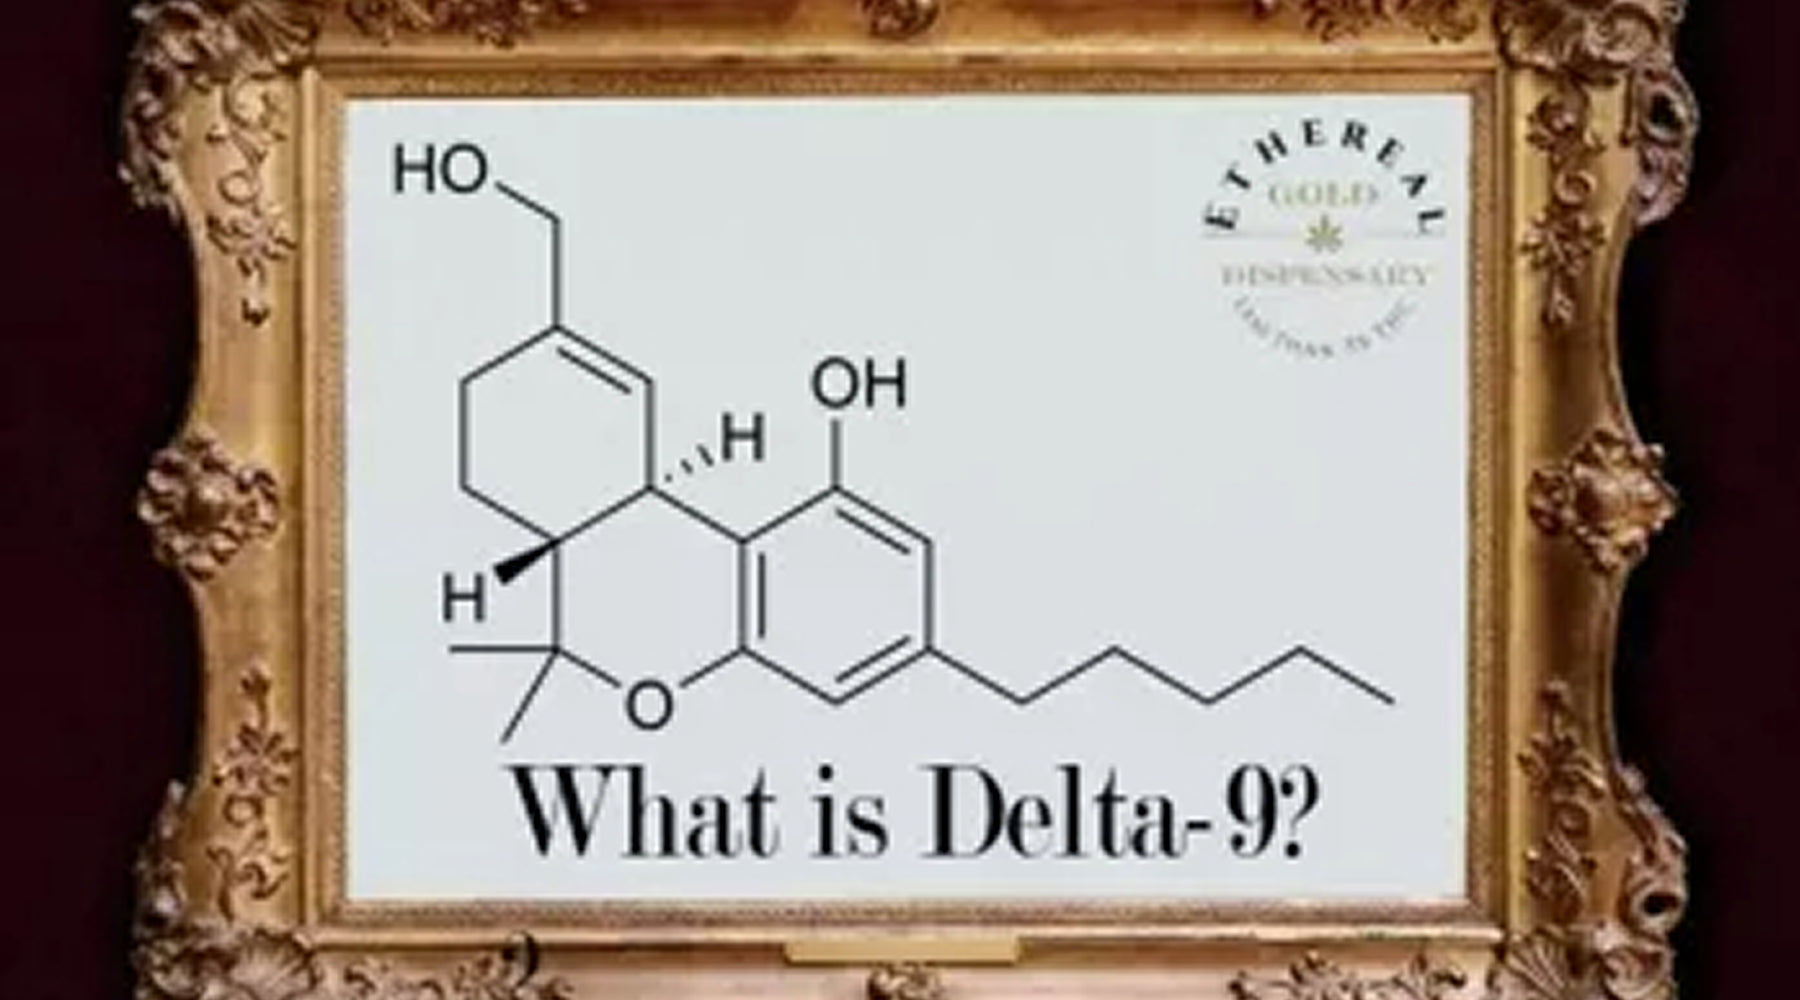 What is Delta-9?